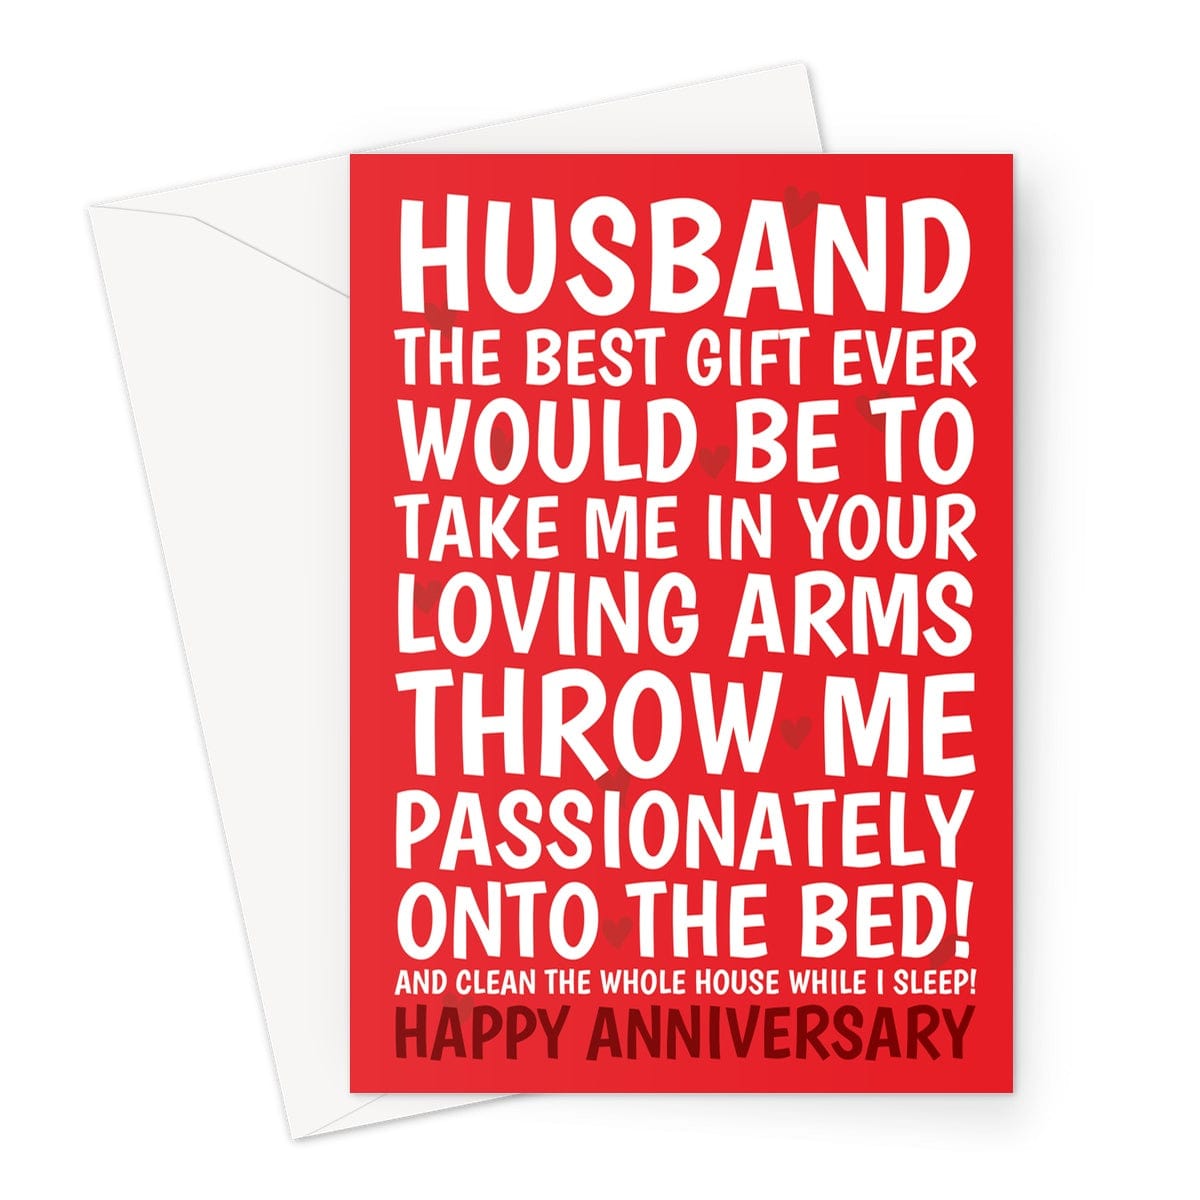 Happy Anniversary Card For Husband - Funny Throw Me On The Bed ...